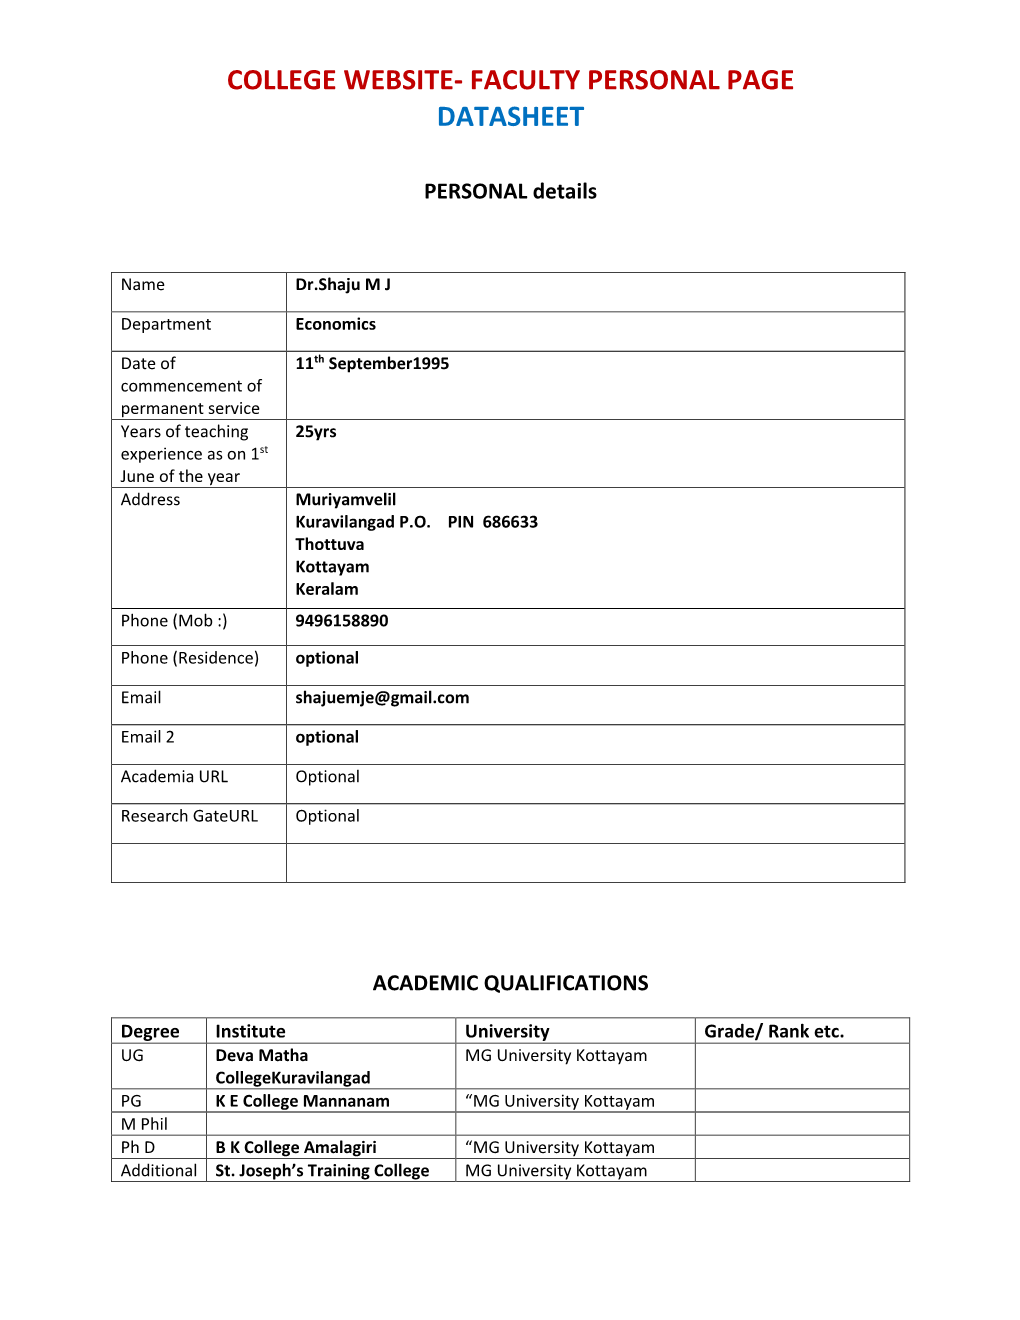 College Website- Faculty Personal Page Datasheet